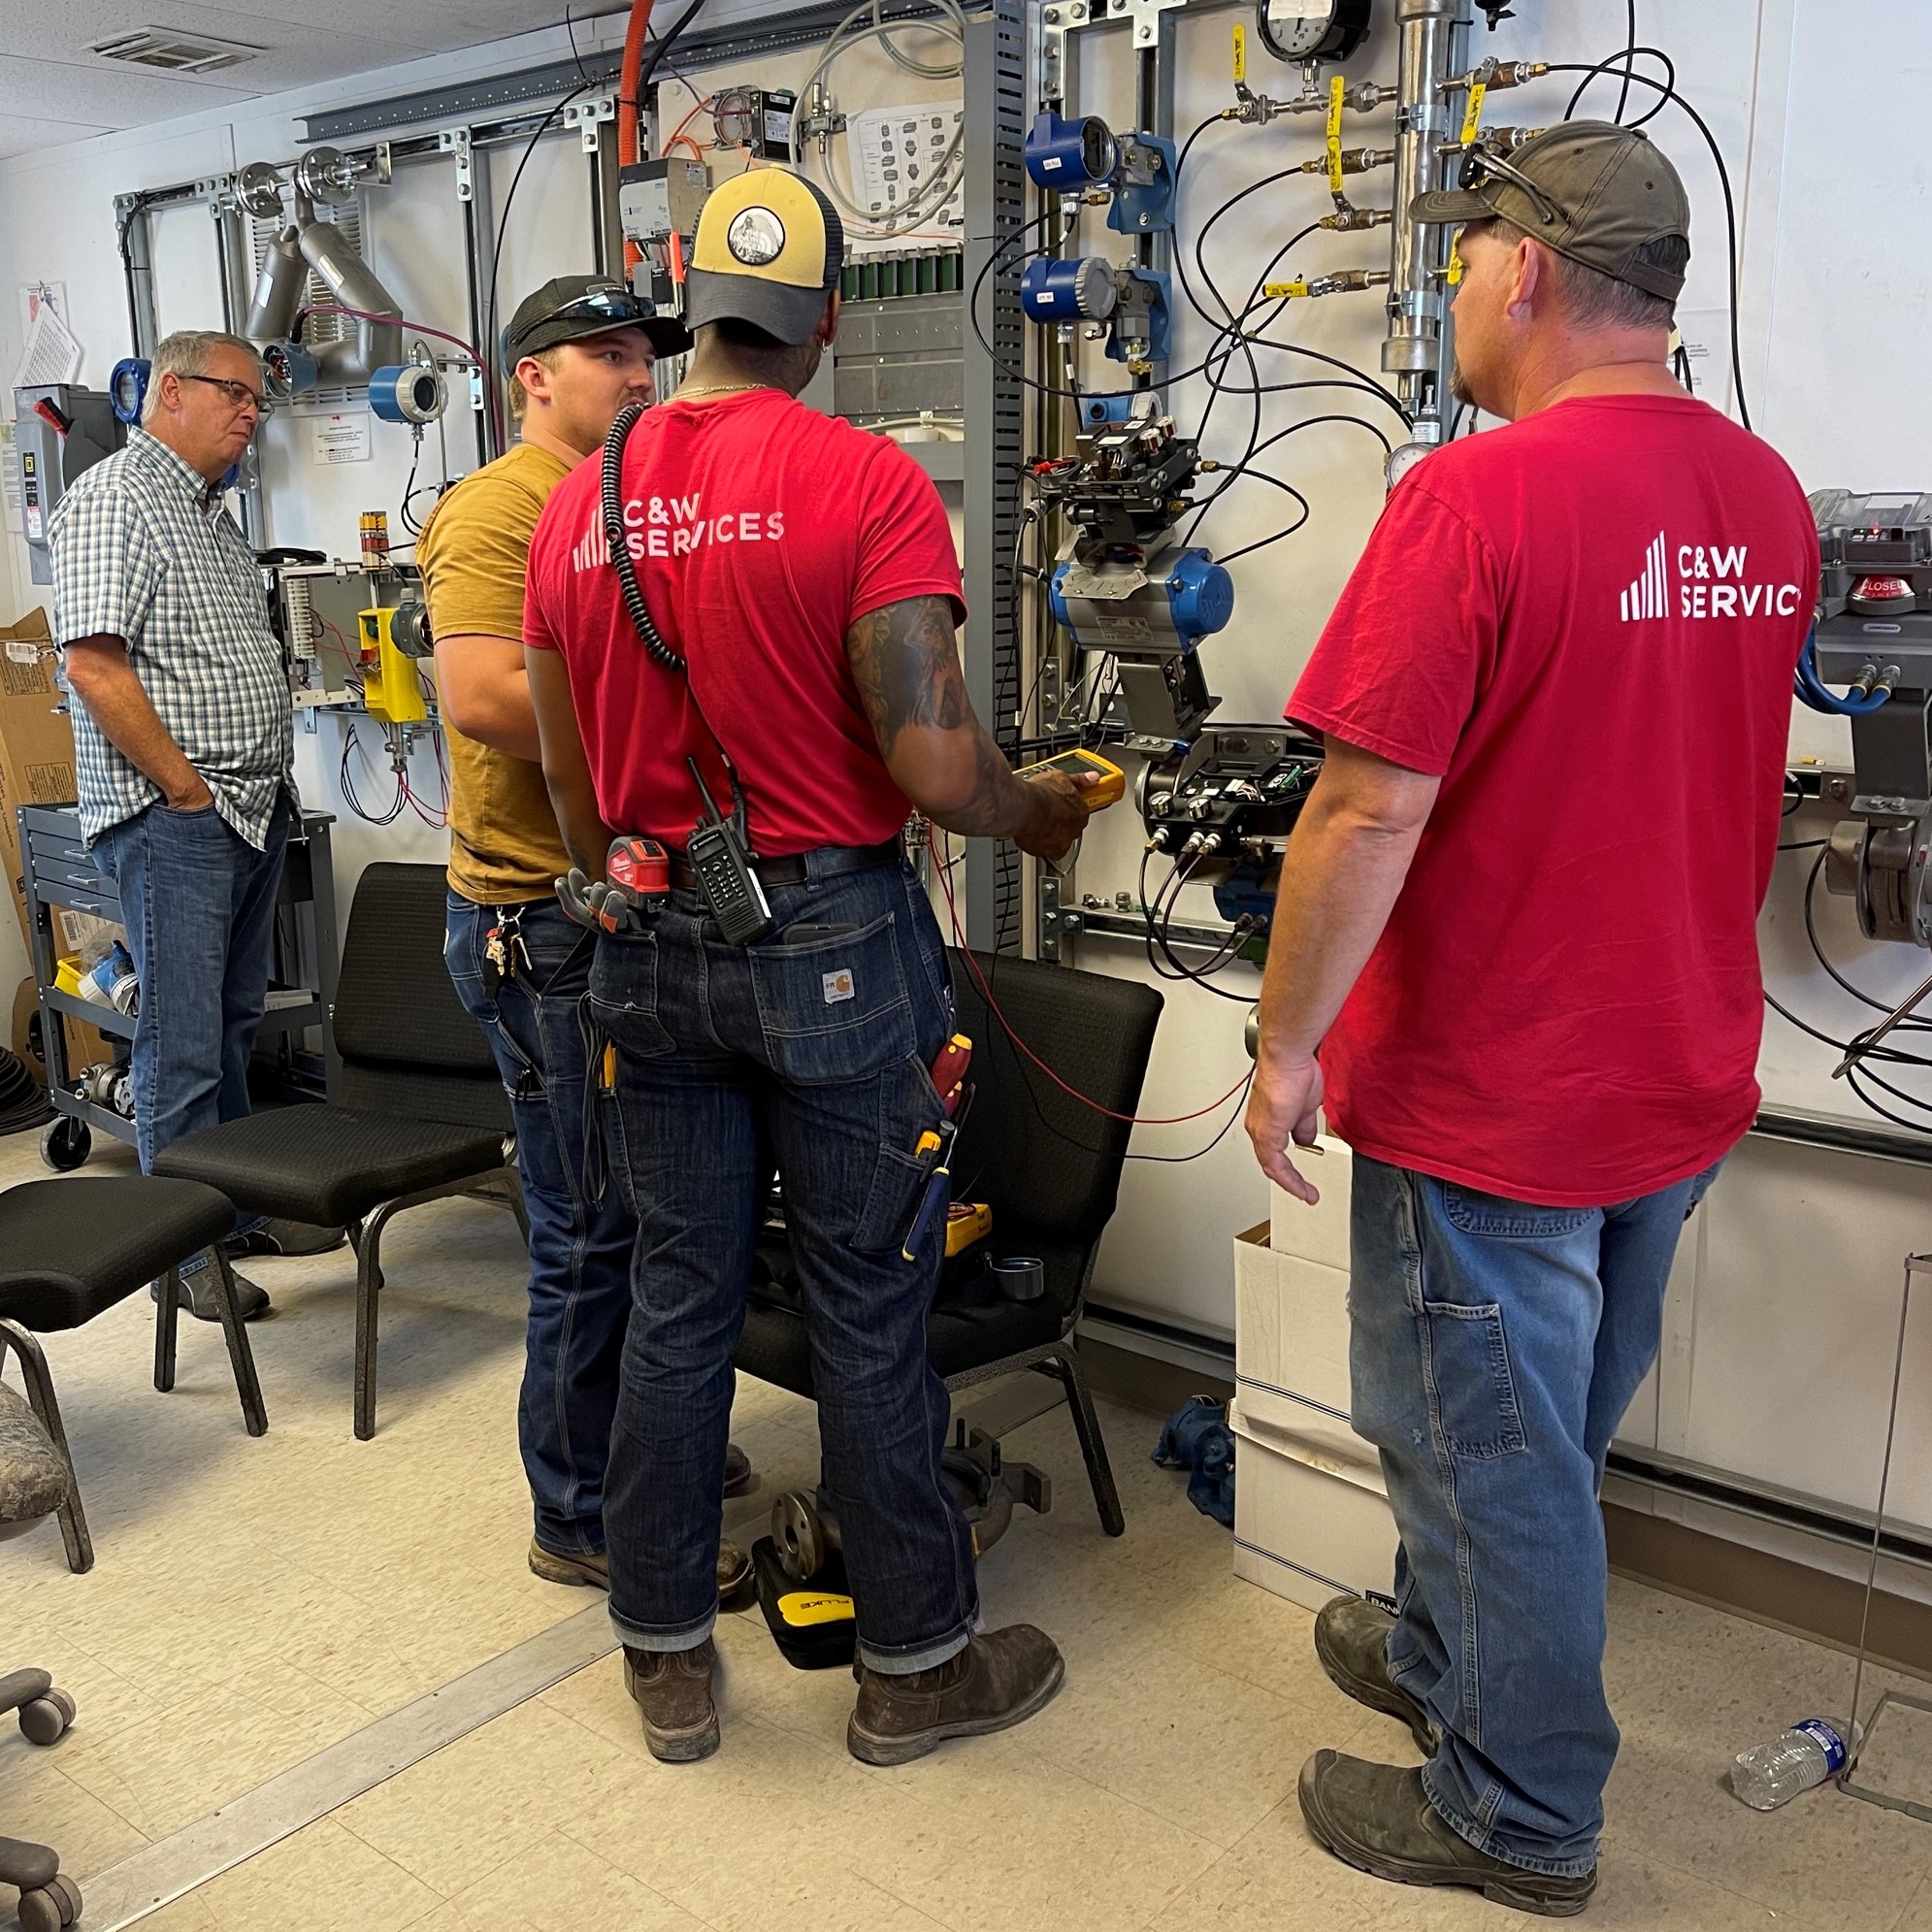 A group of men in C&W Services shirt being shown how to use maintenance equipment